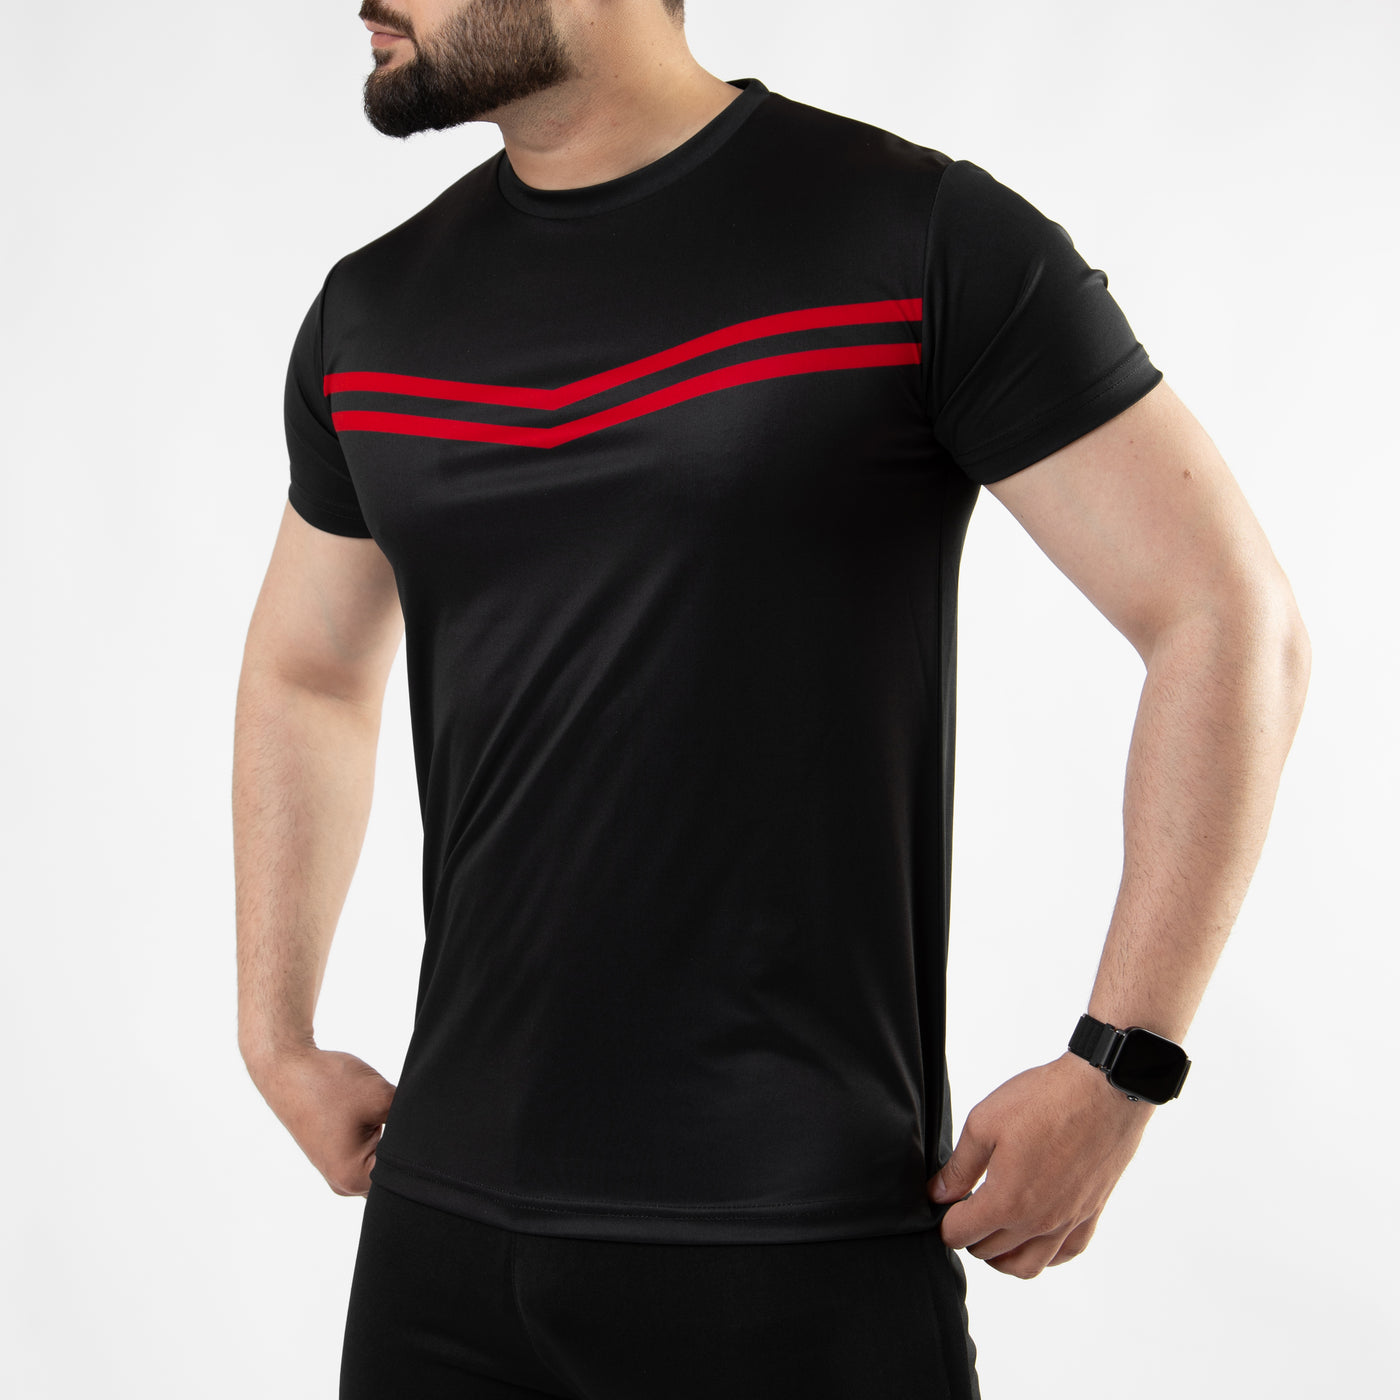 Premium Black Sublimated Quick Dry T-Shirt with Front Red Stripes